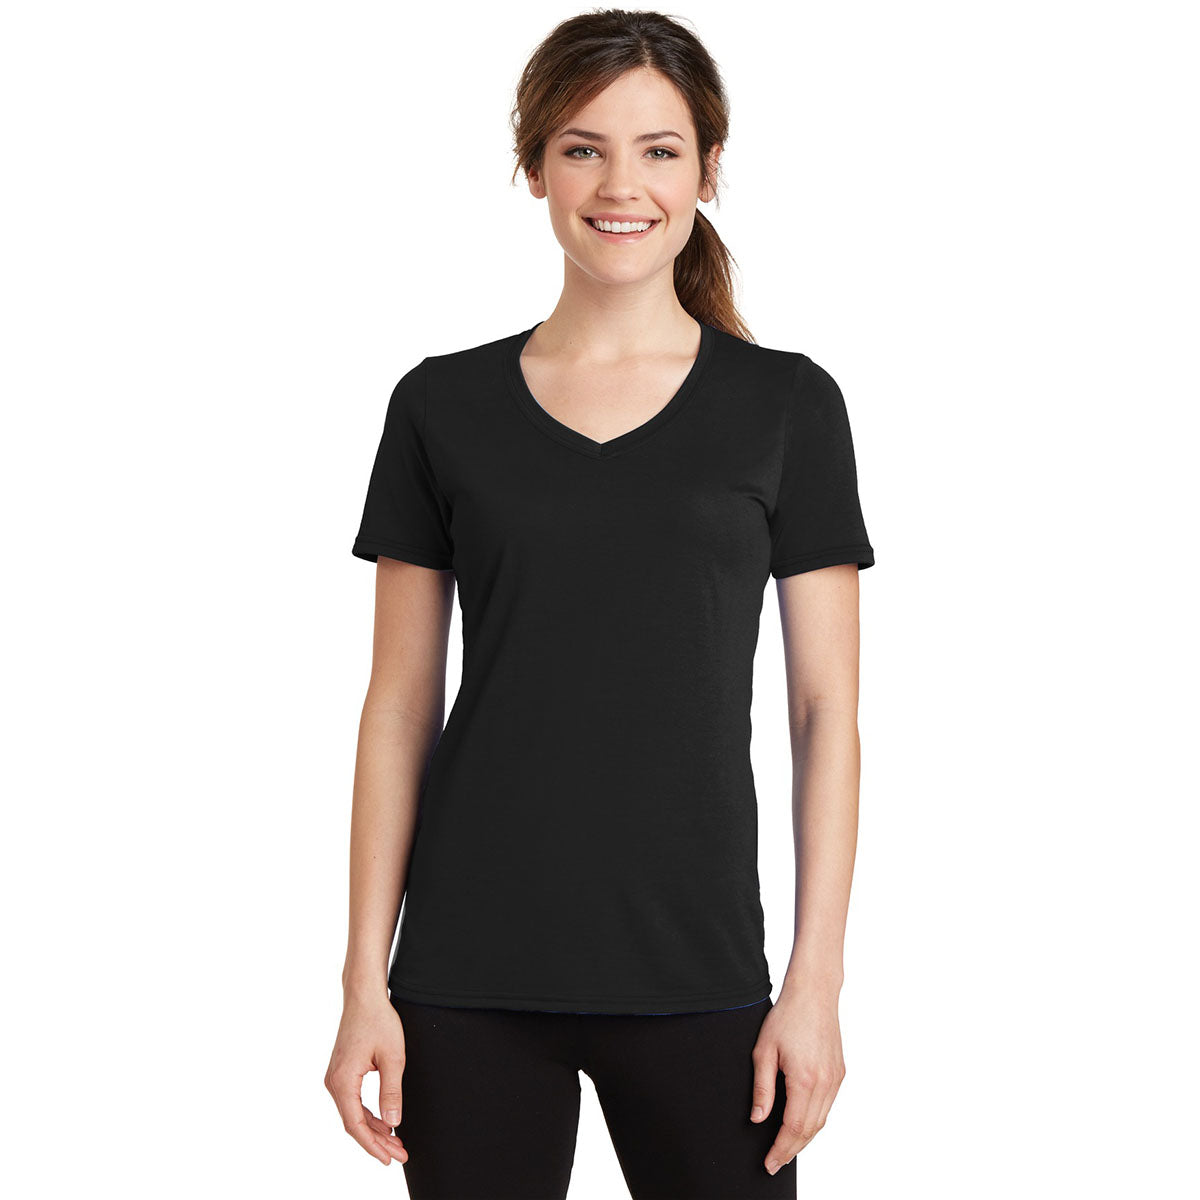 Ladies Performance V-Neck Moisture Wicking V-Neck Tee With Or Without Protective Underarm Shields Style #LST353 - kleinerts.com